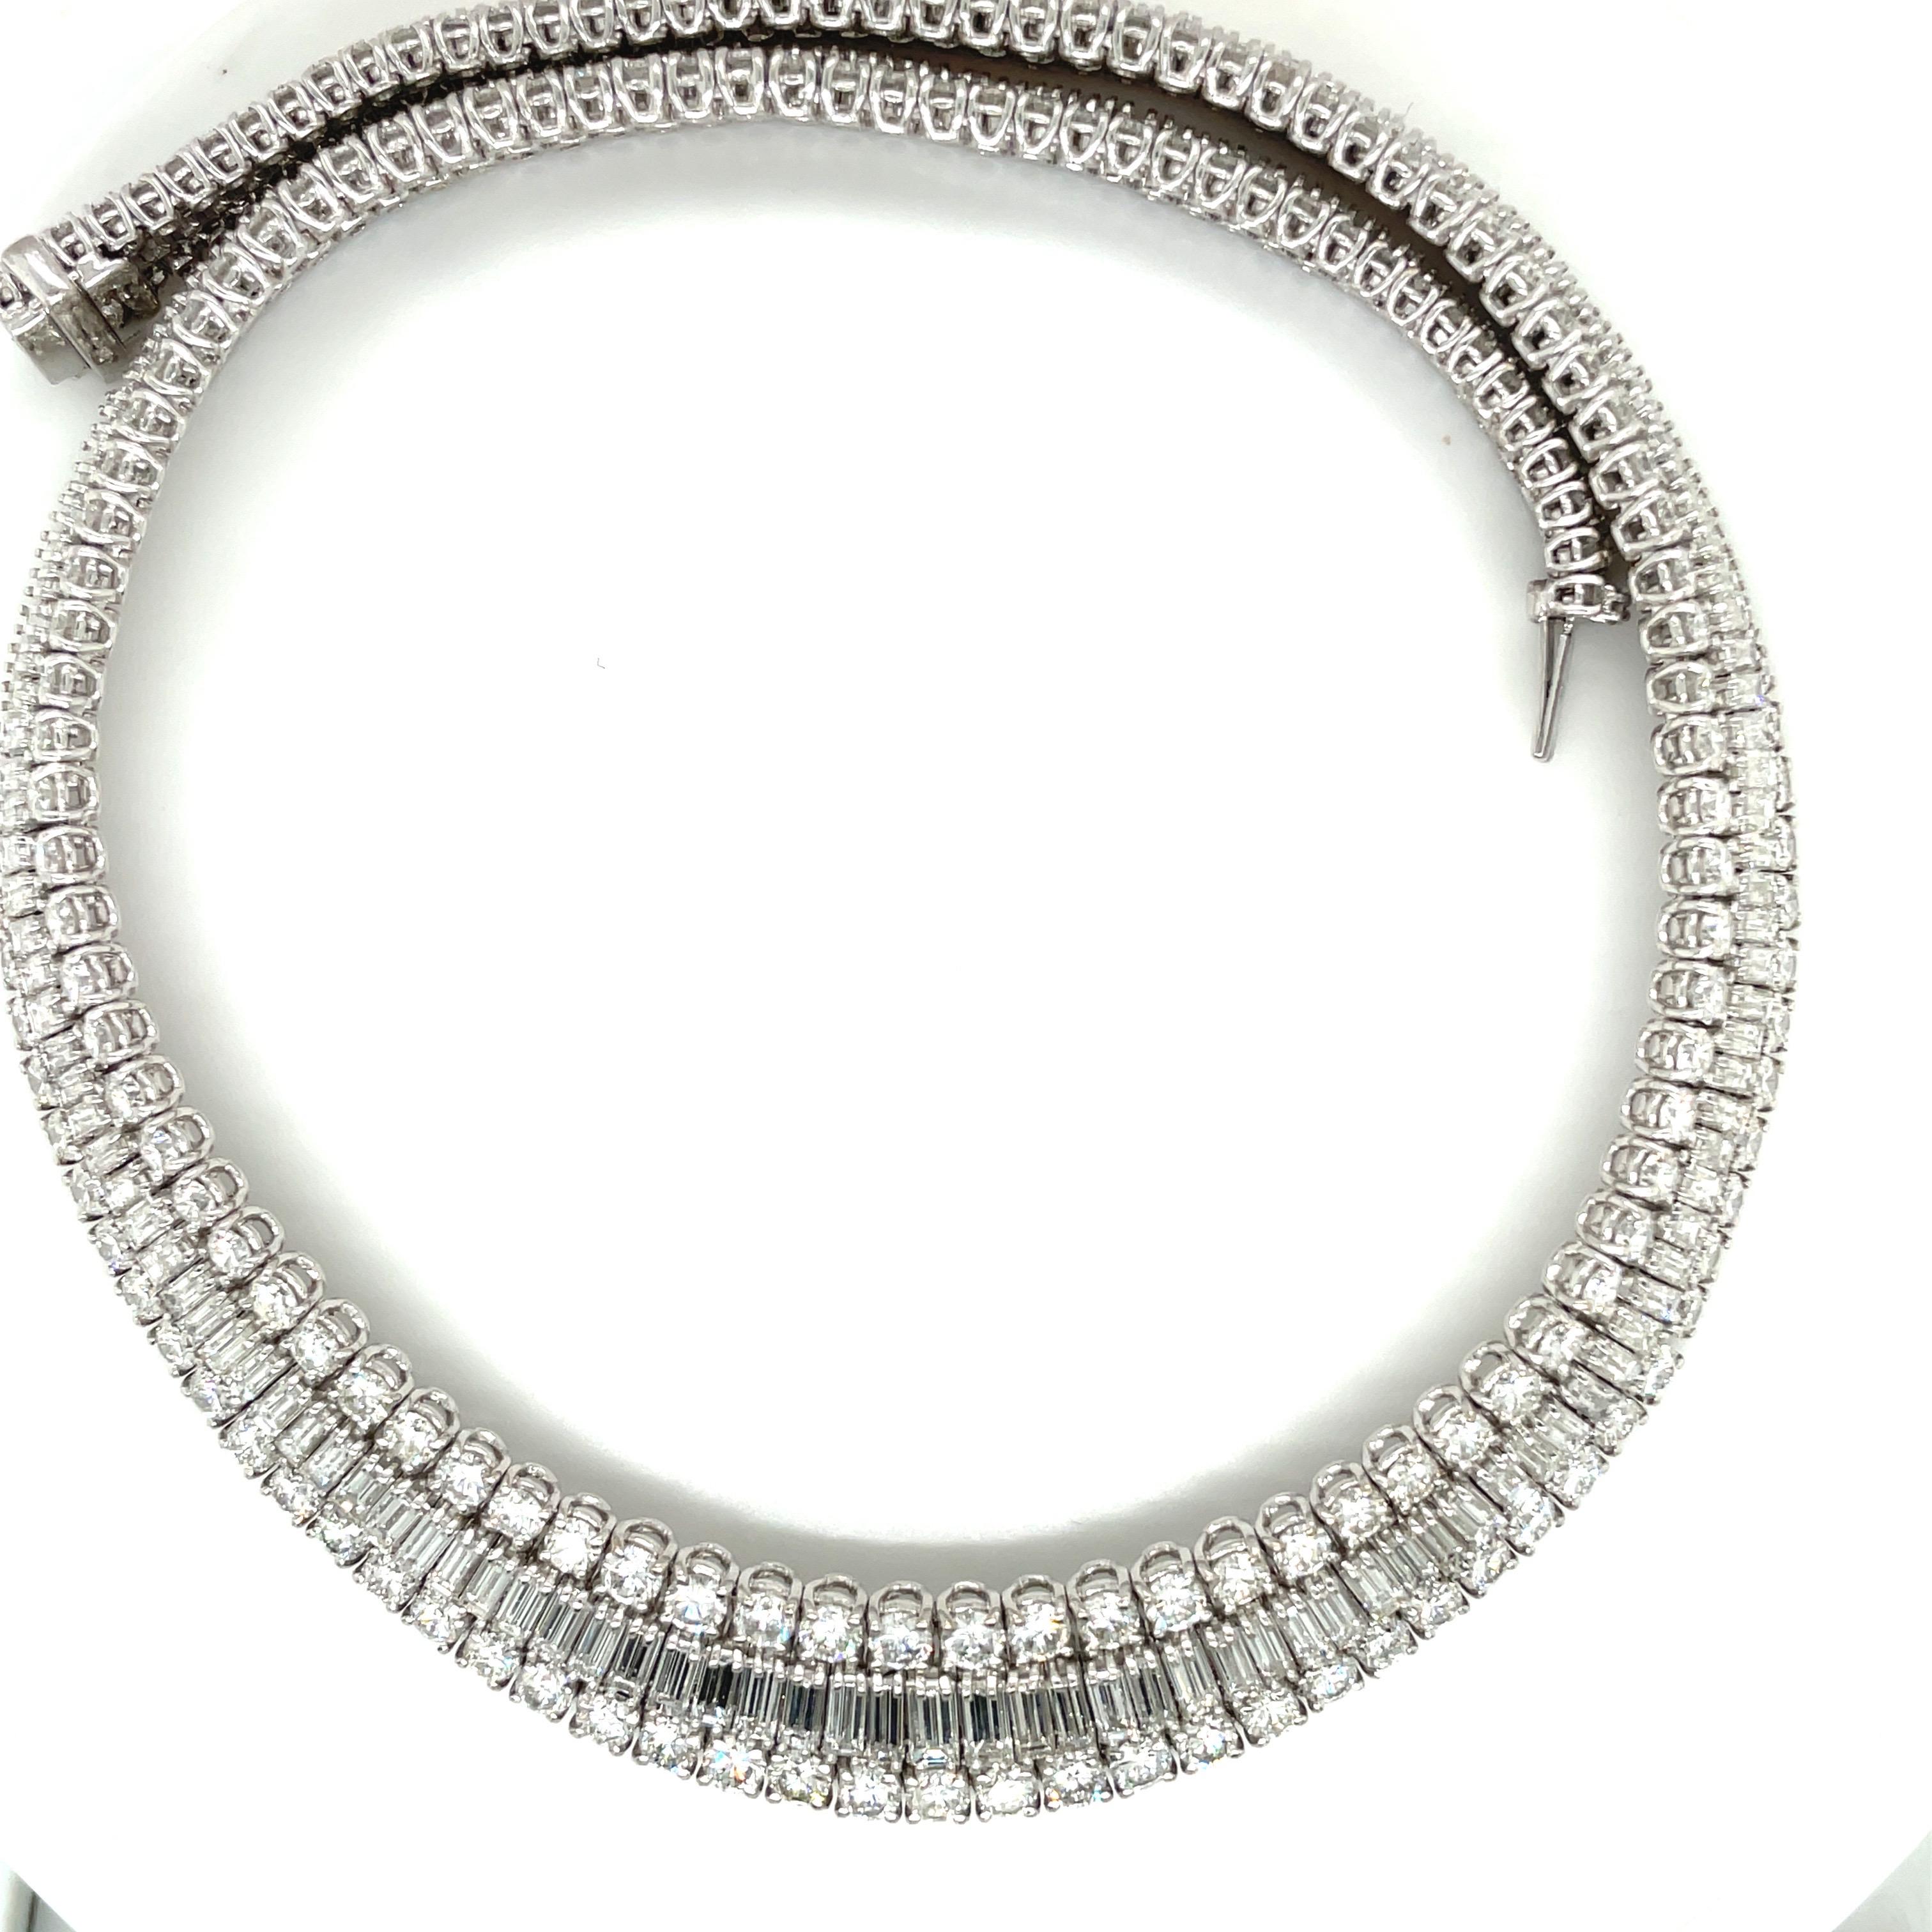 Contemporary Cellini 18KT White Gold 59.78. Baguette & Round Diamond Collar Necklace For Sale